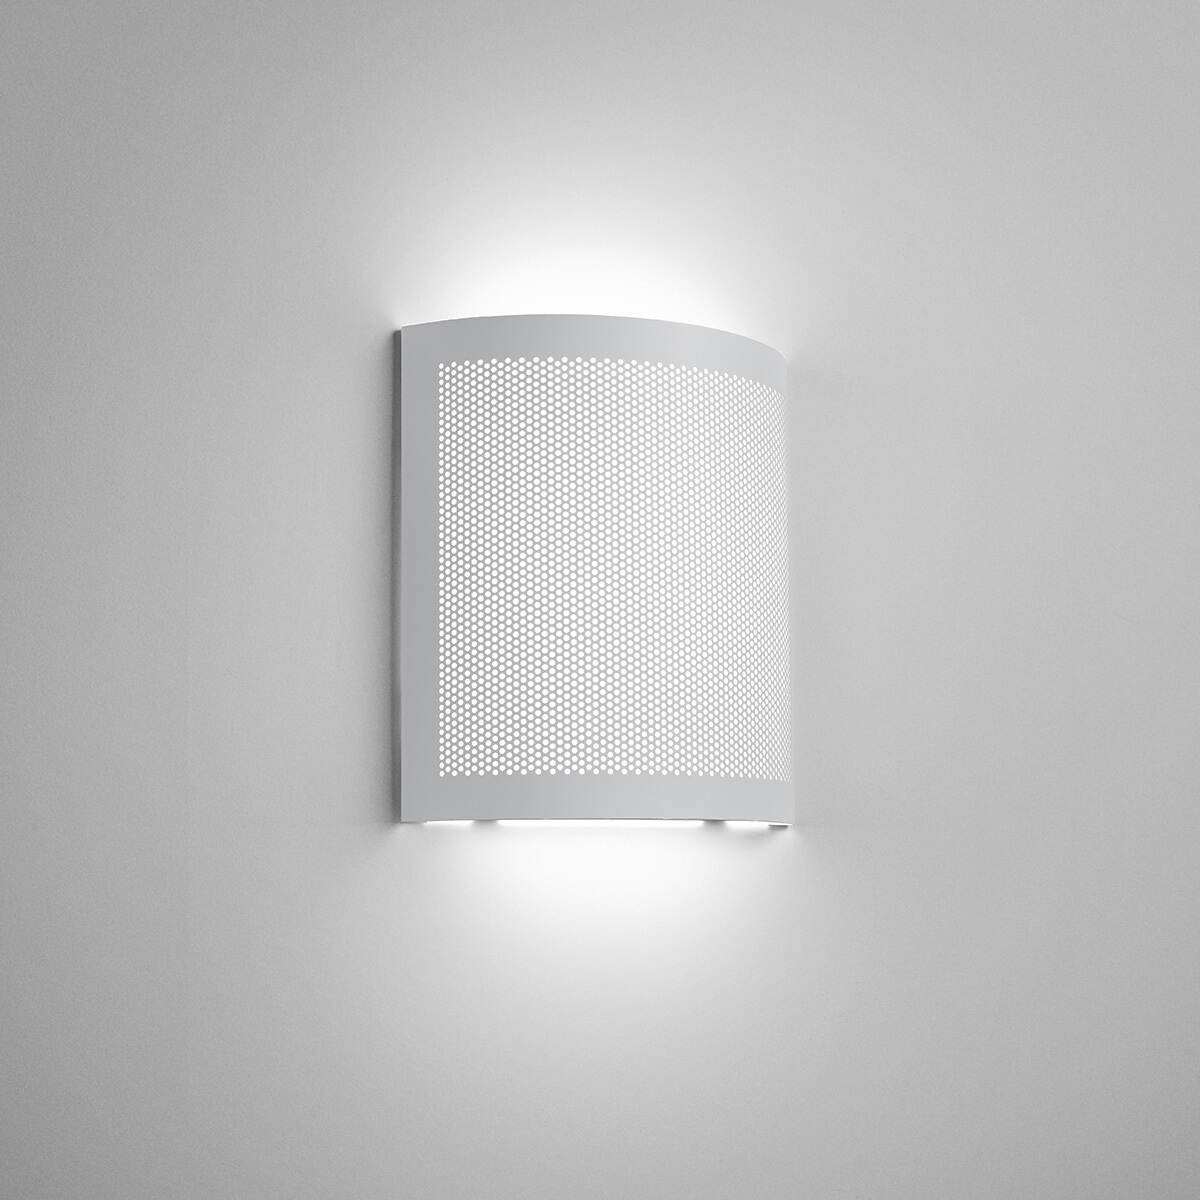 A square indirect wall sconce with a curved, perforated front plate